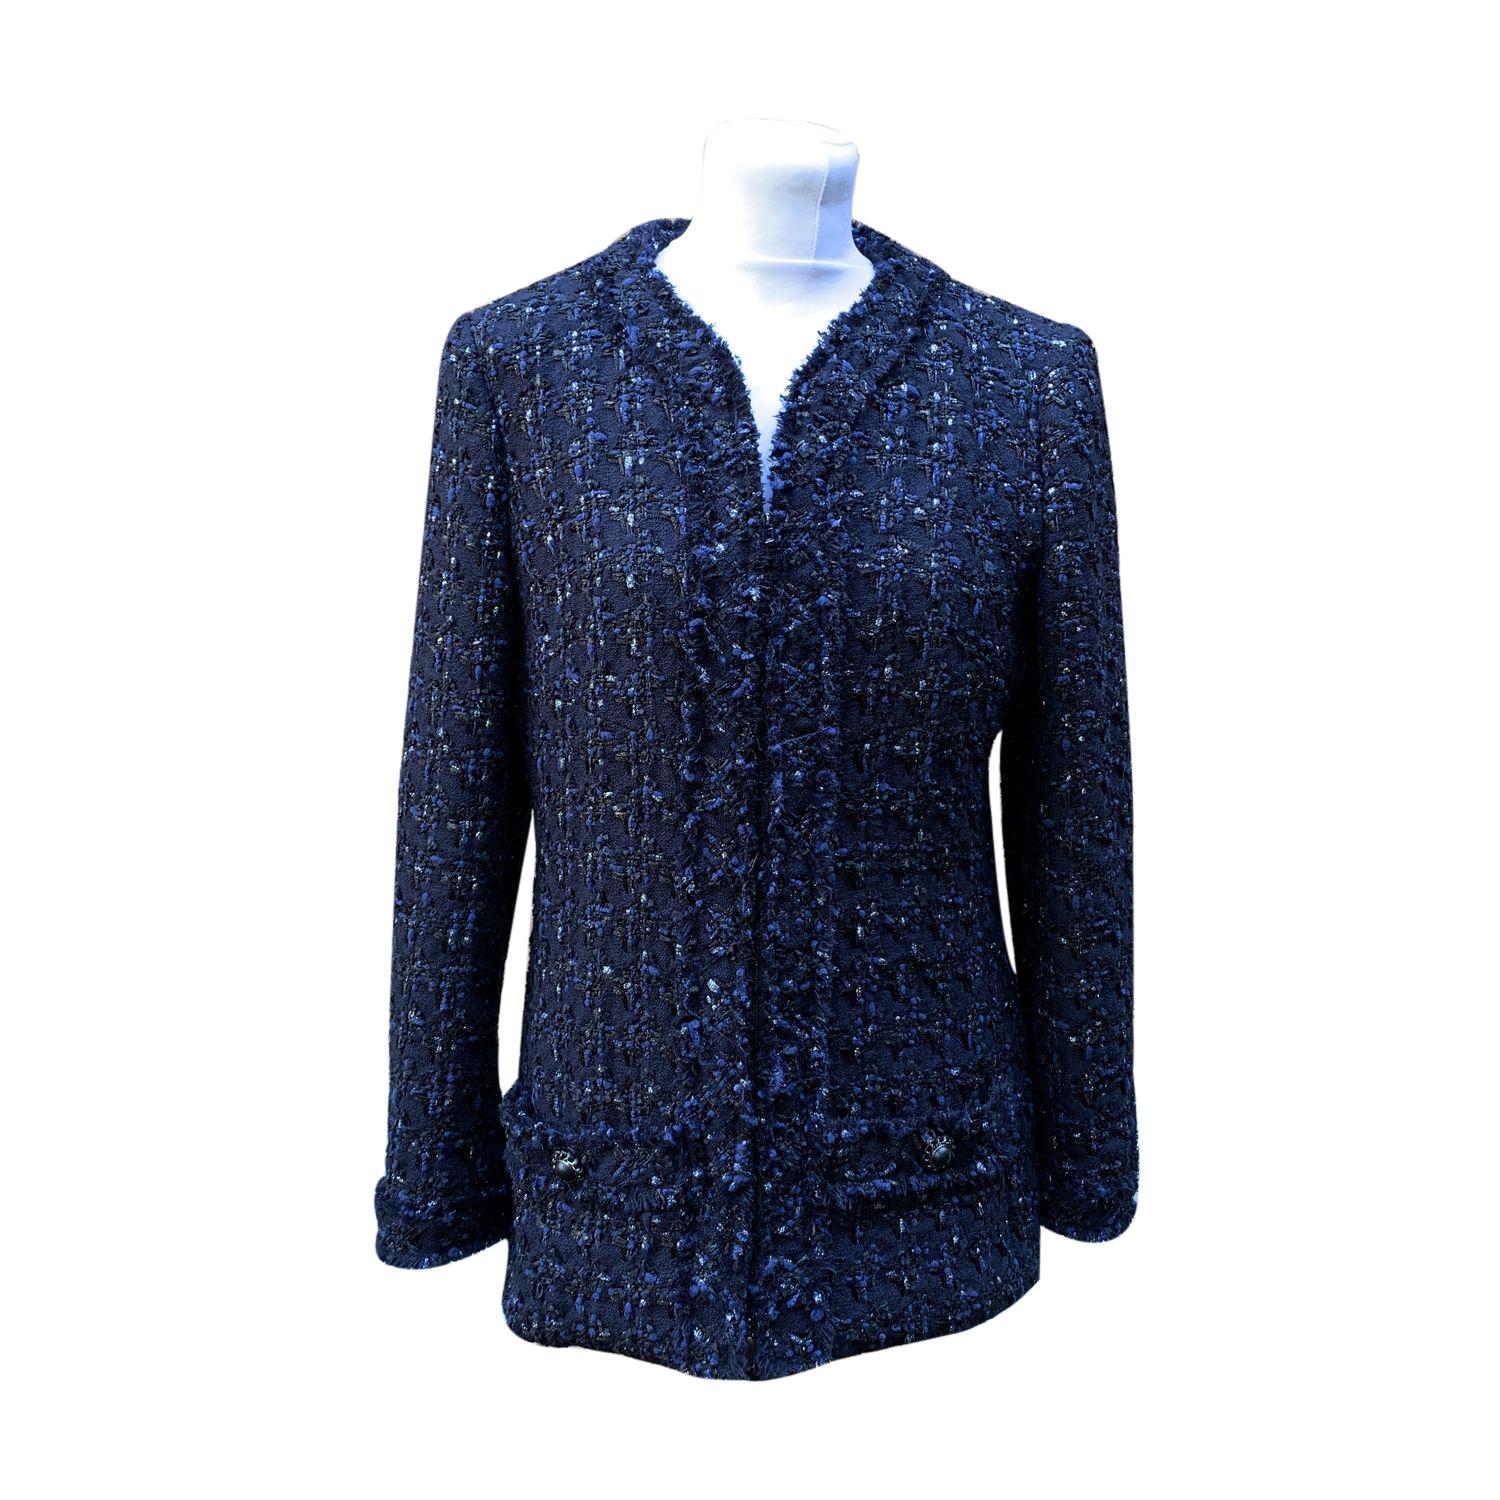 Chanel jacket from the 2016 Collection. Blue, black and silver bouclé pattern. Concealed zip closure on the front. 2 pockets on the front. Signature chain along the hem. Made in France. Composition: 40% Wool, 36% Nylon, 6% Polyester, 6%